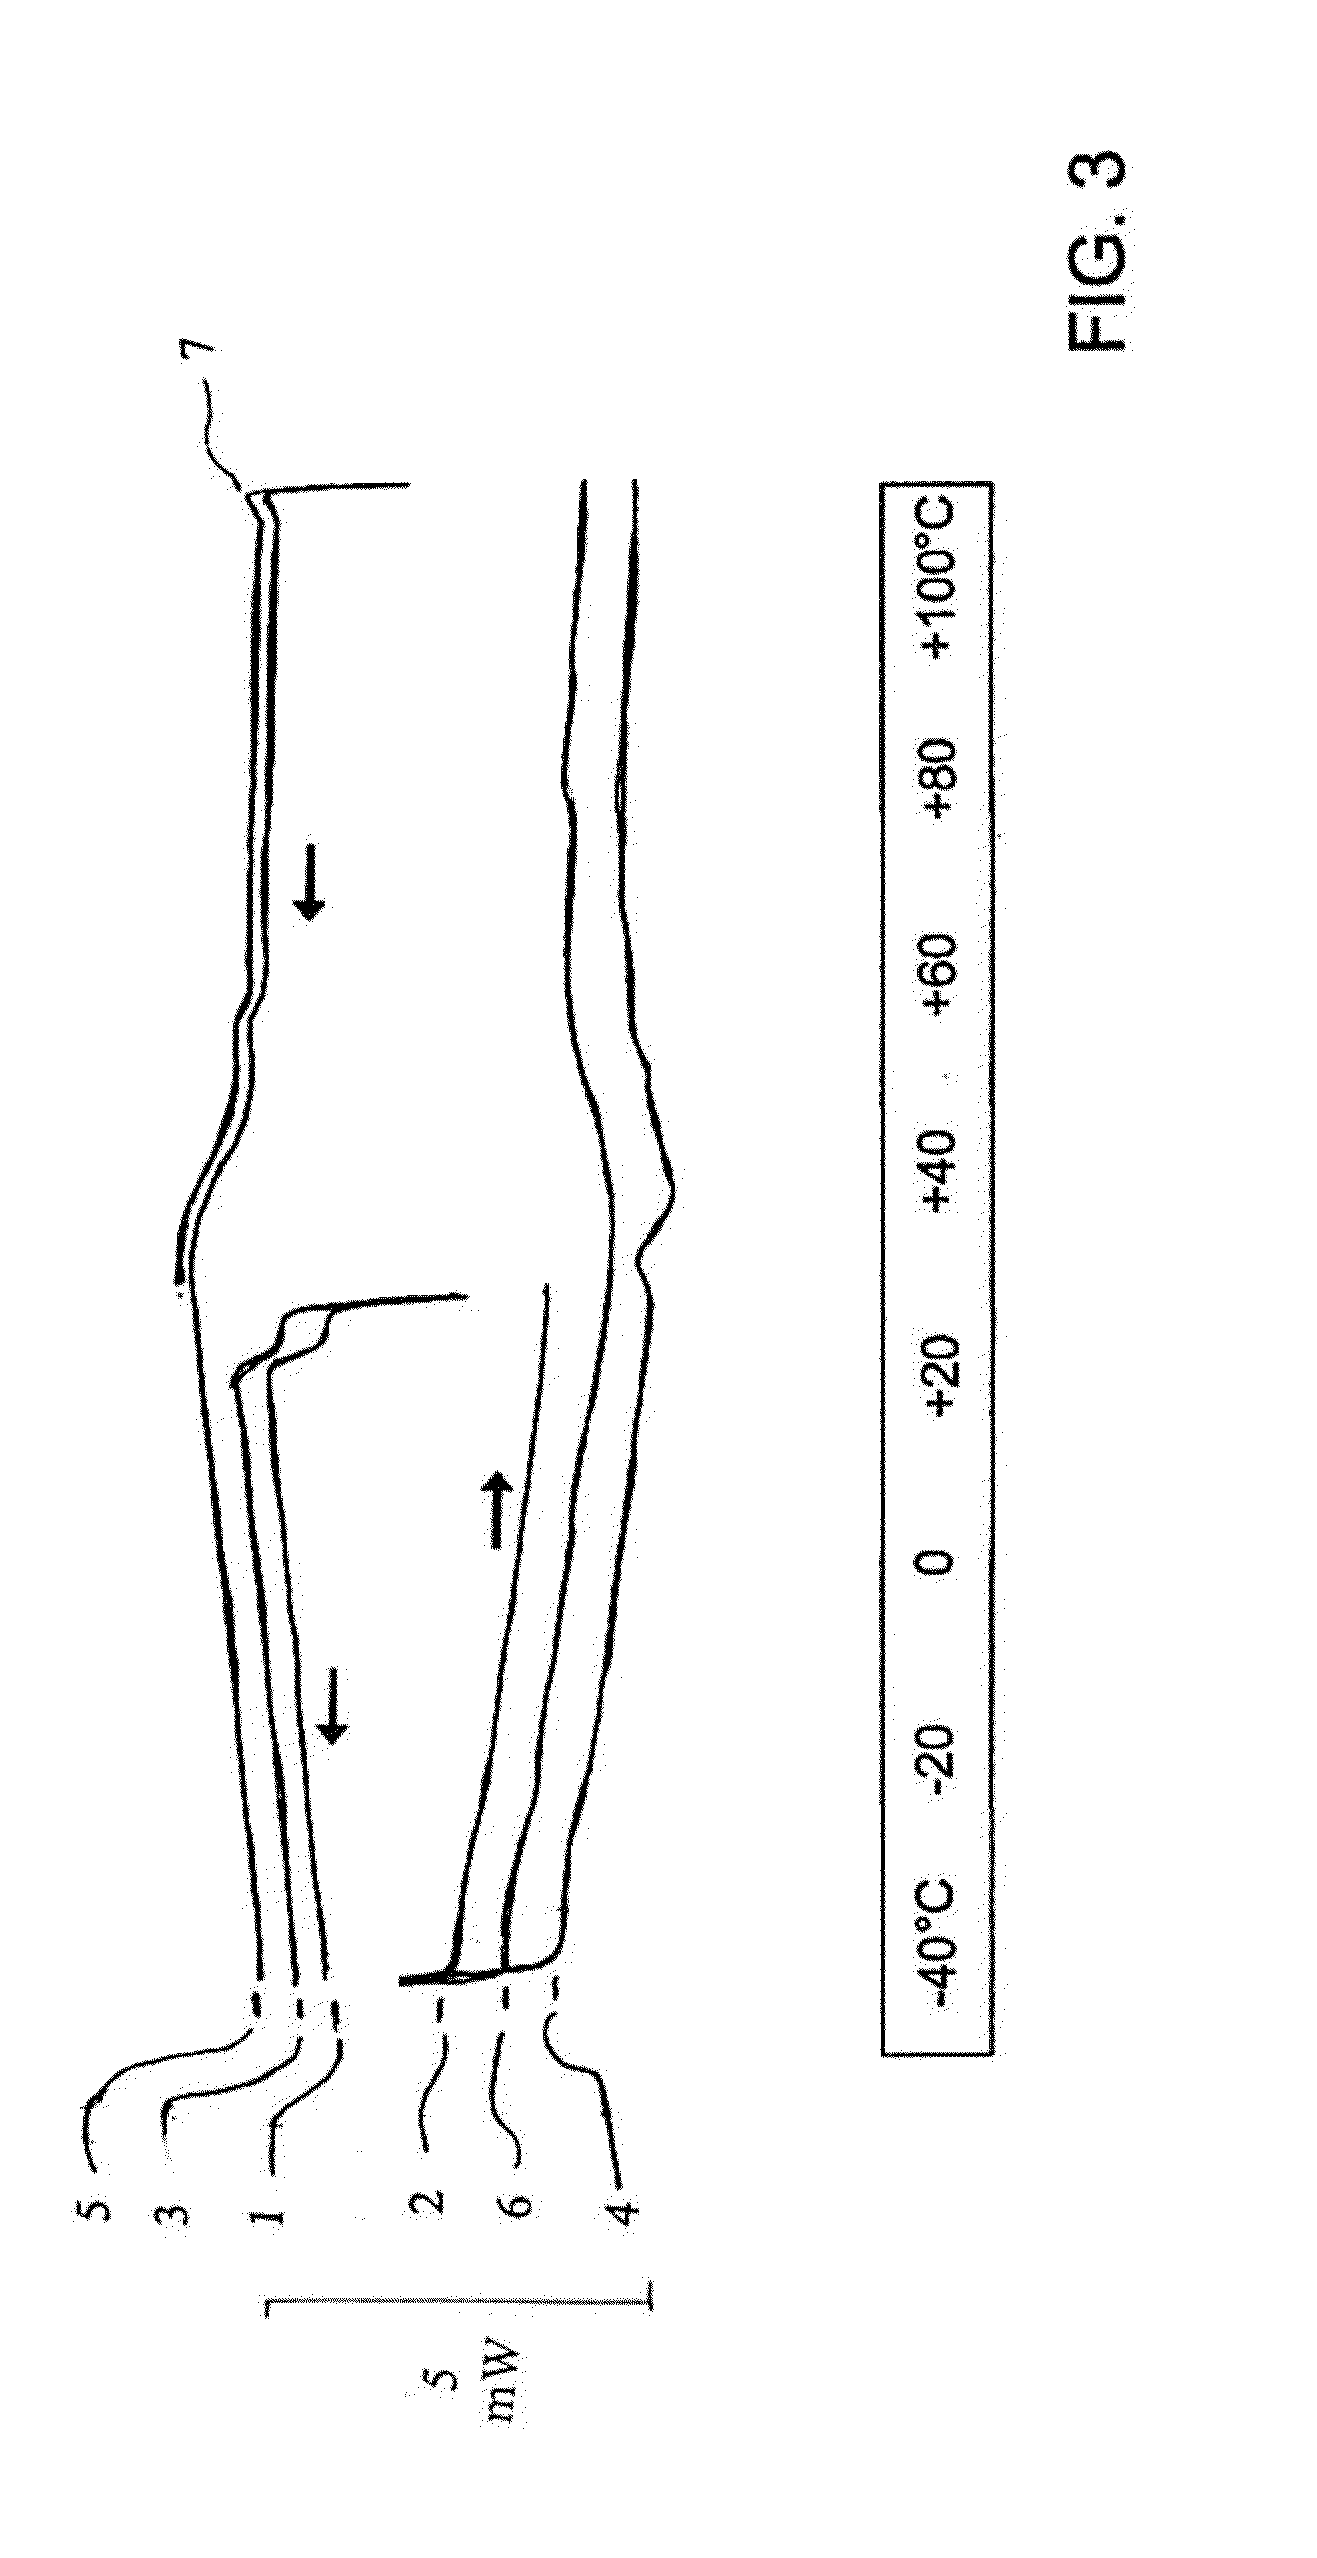 System and Method for Creating and Maintaining Liquid Bunker and Reducing Sulfur Contaminants